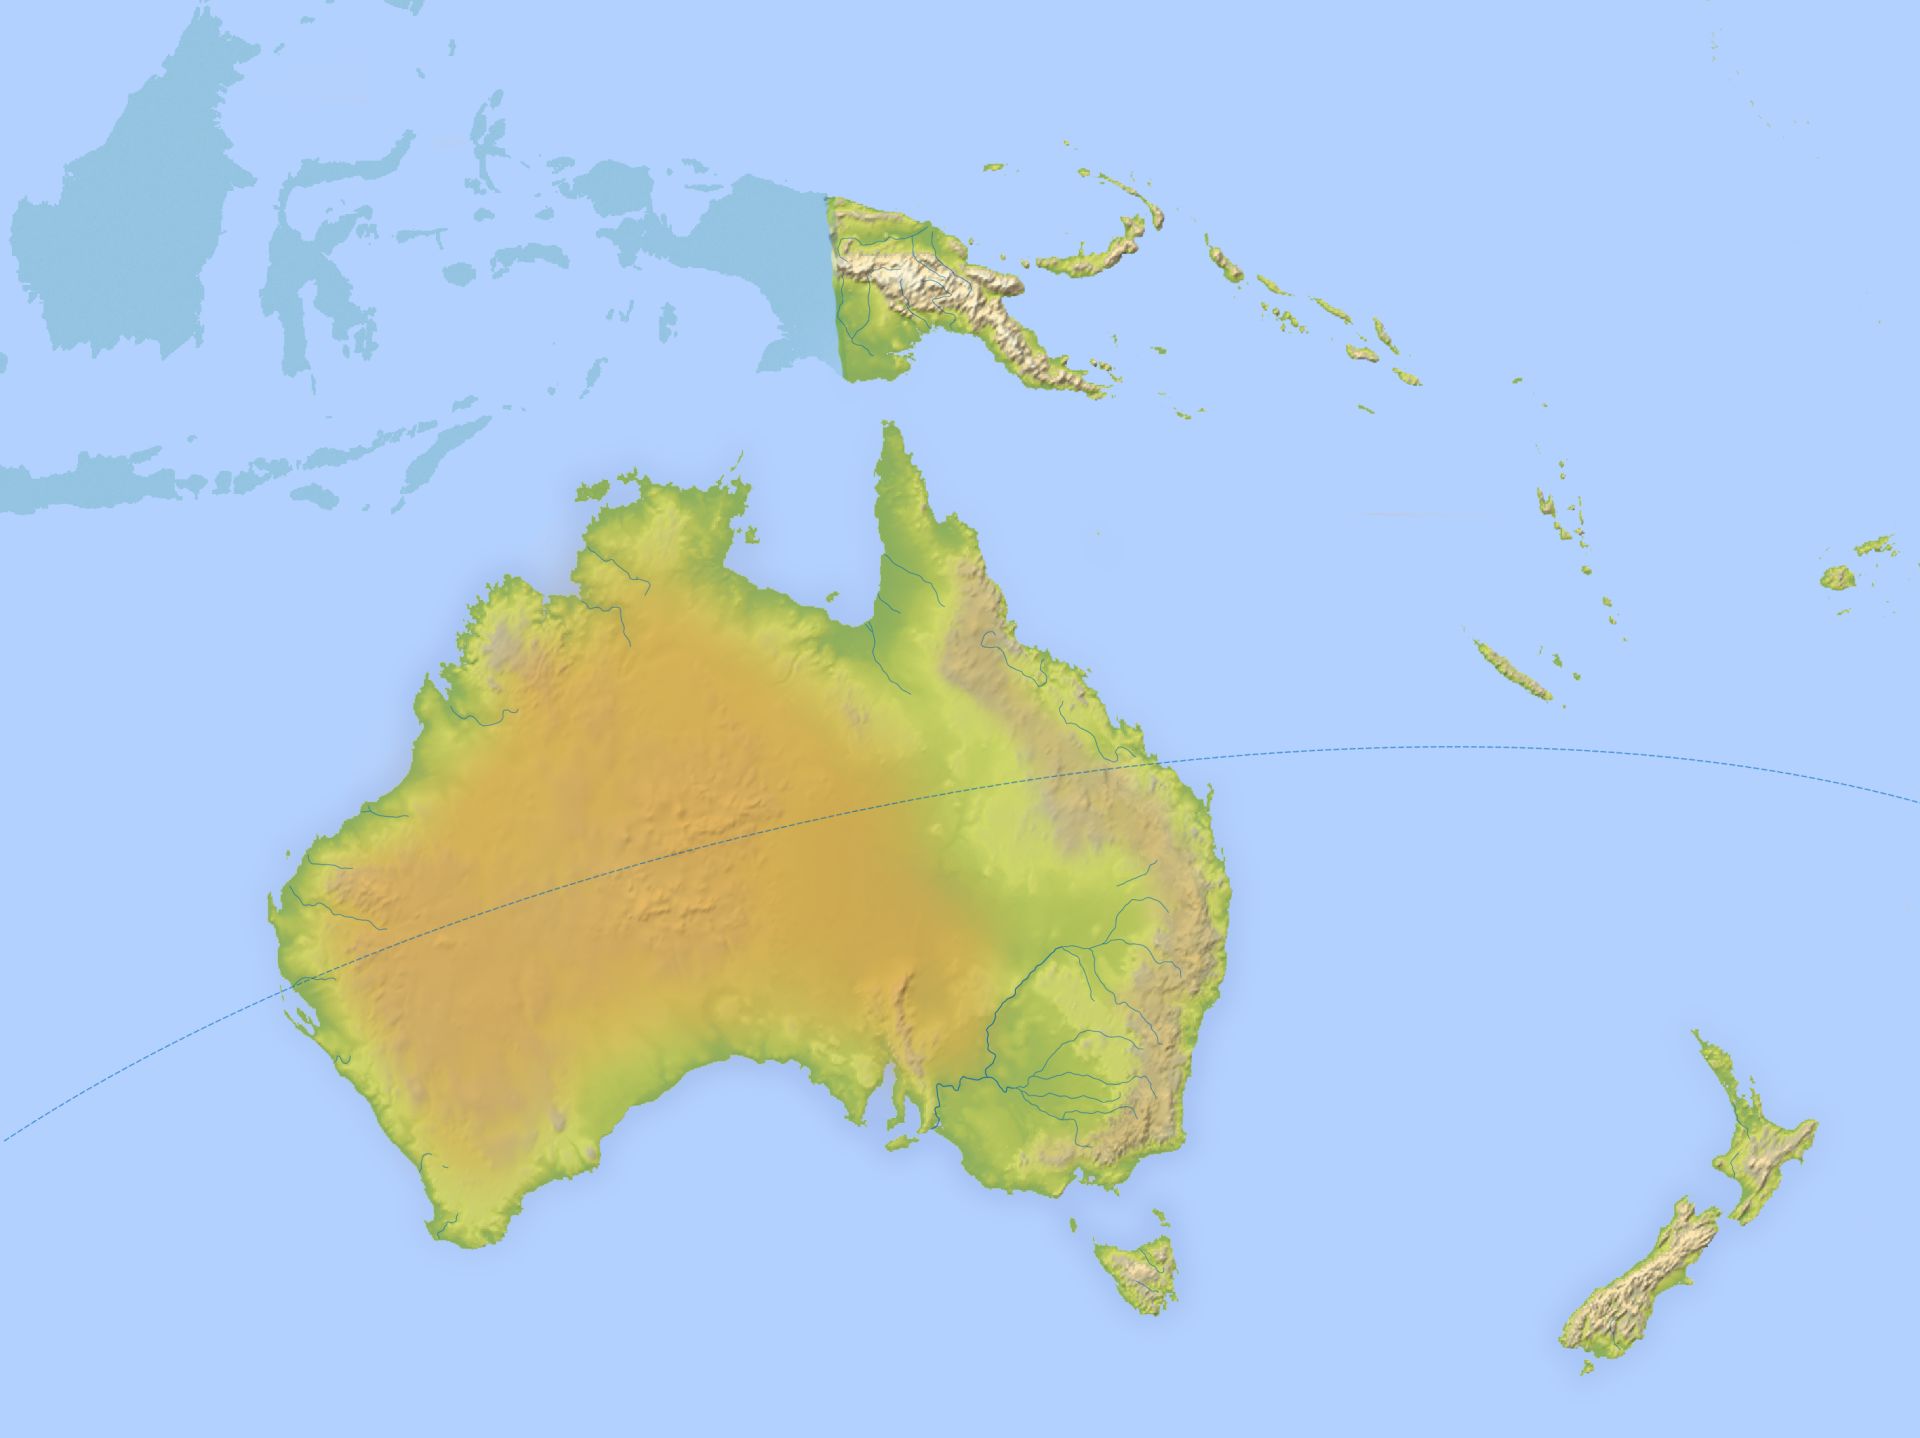 Australasia and Oceania Continent Facts | DK Find Out